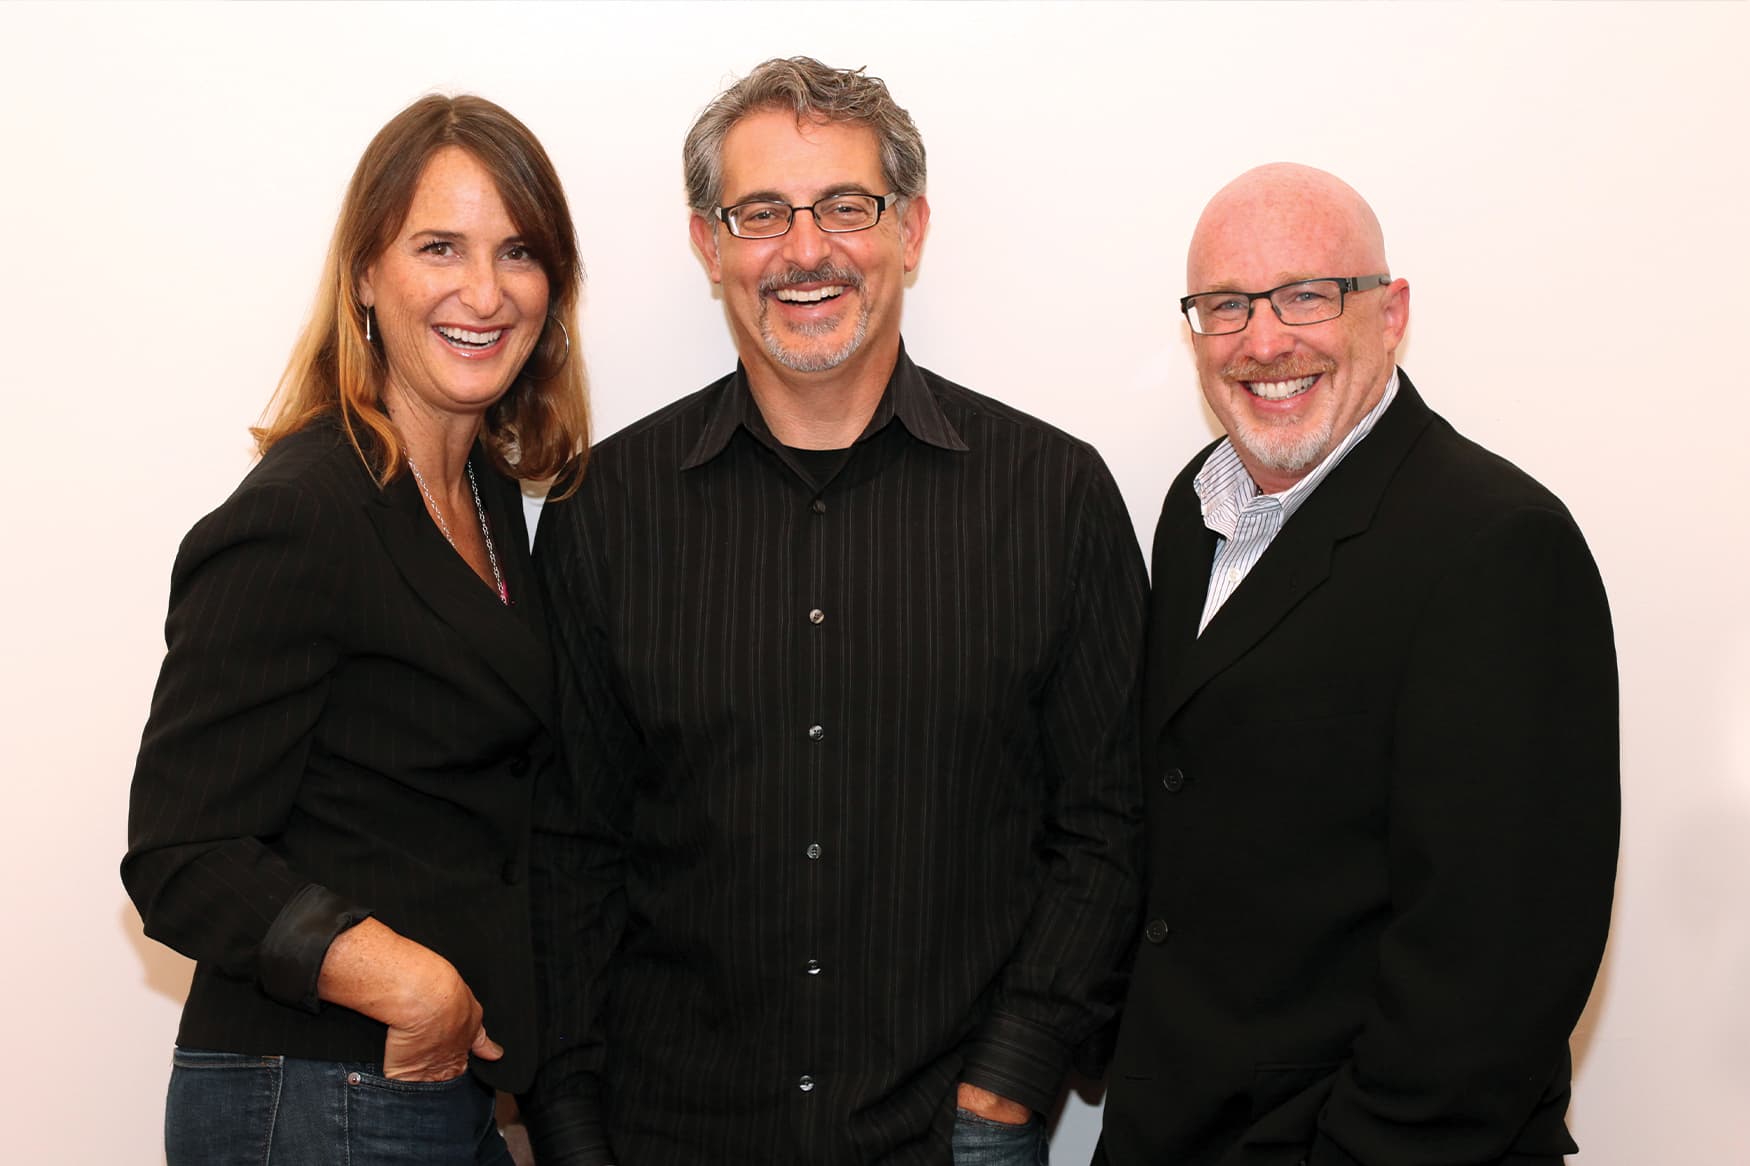 RSM Design’s three founding members: (from left to right) Suzanne, Martin, and Harry. 